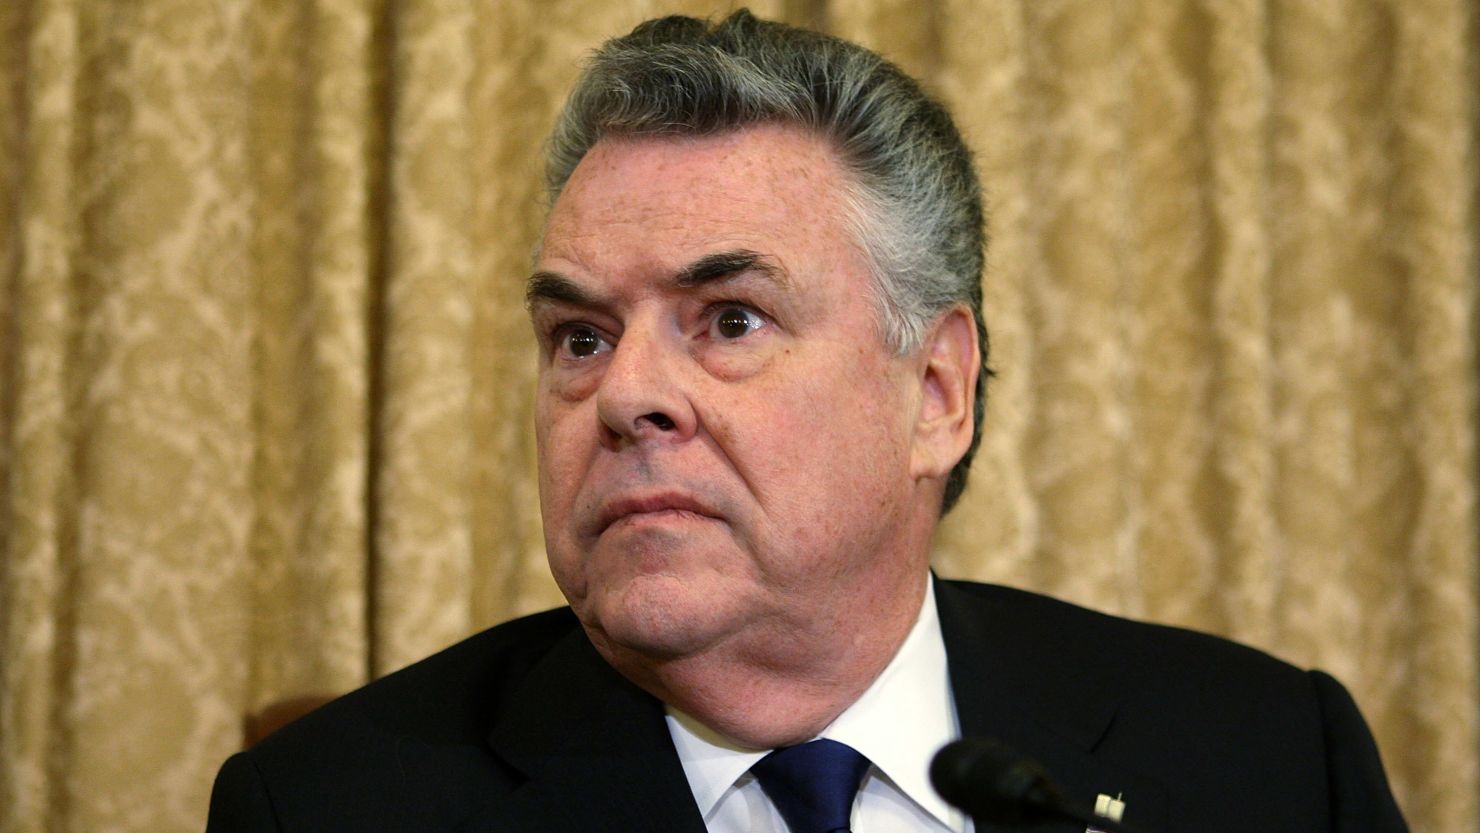 U.S. Rep. Peter King said he wrote to Iraqi Prime Minister Nuri al-Maliki to appeal for the release of the security contractors.